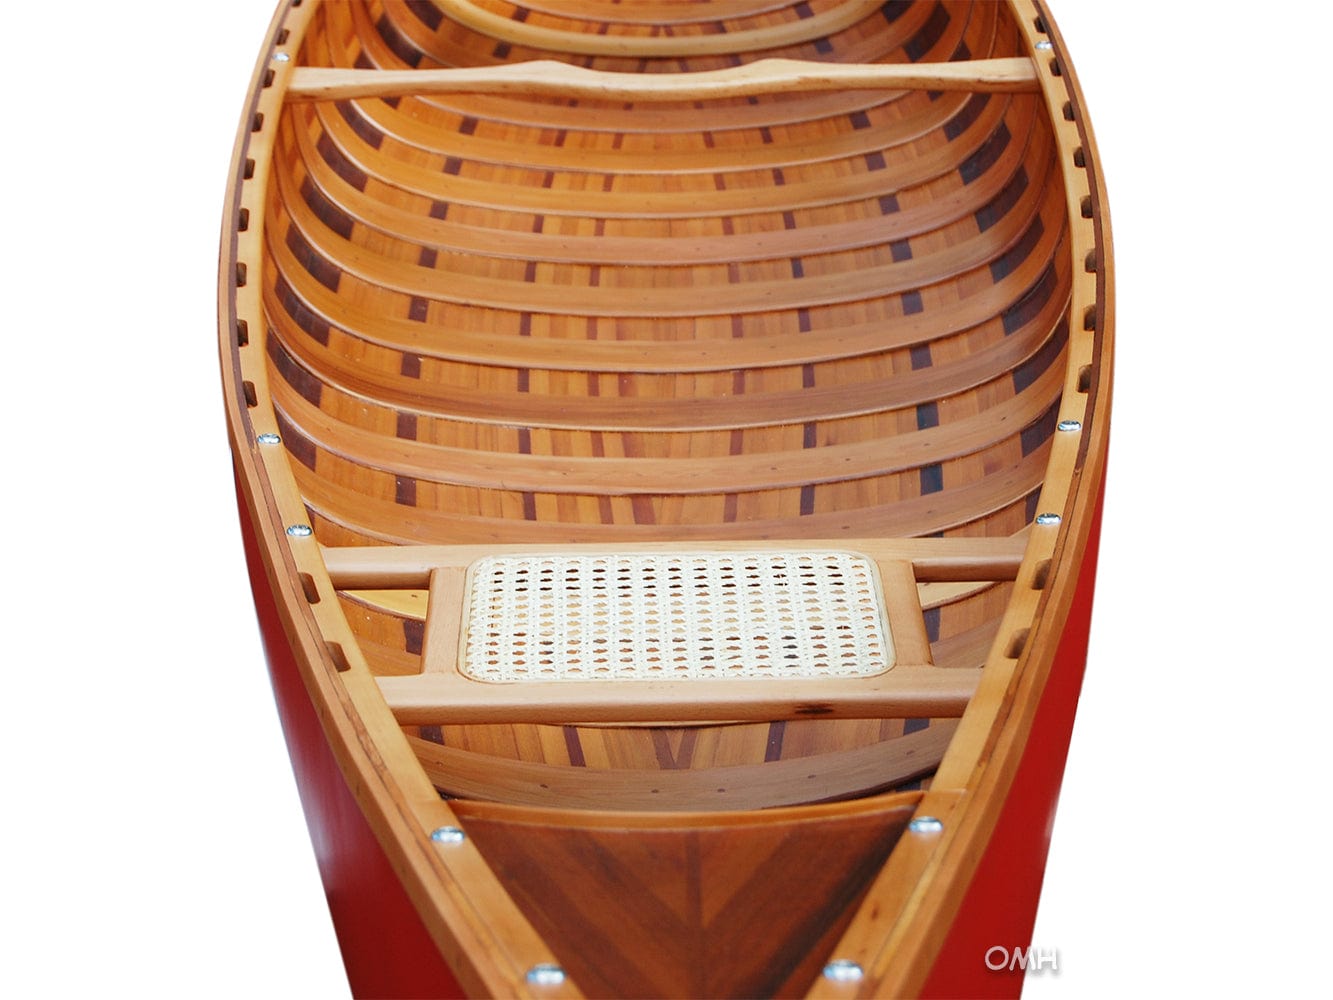 ALDO Kayaking, Canoeing & Rafting>Canoes L: 187.5 W: 31.5 H: 24 Inches / NEW / wood Real High Quality  Red Wood Cedar Canoe 16 Ft With Ribs